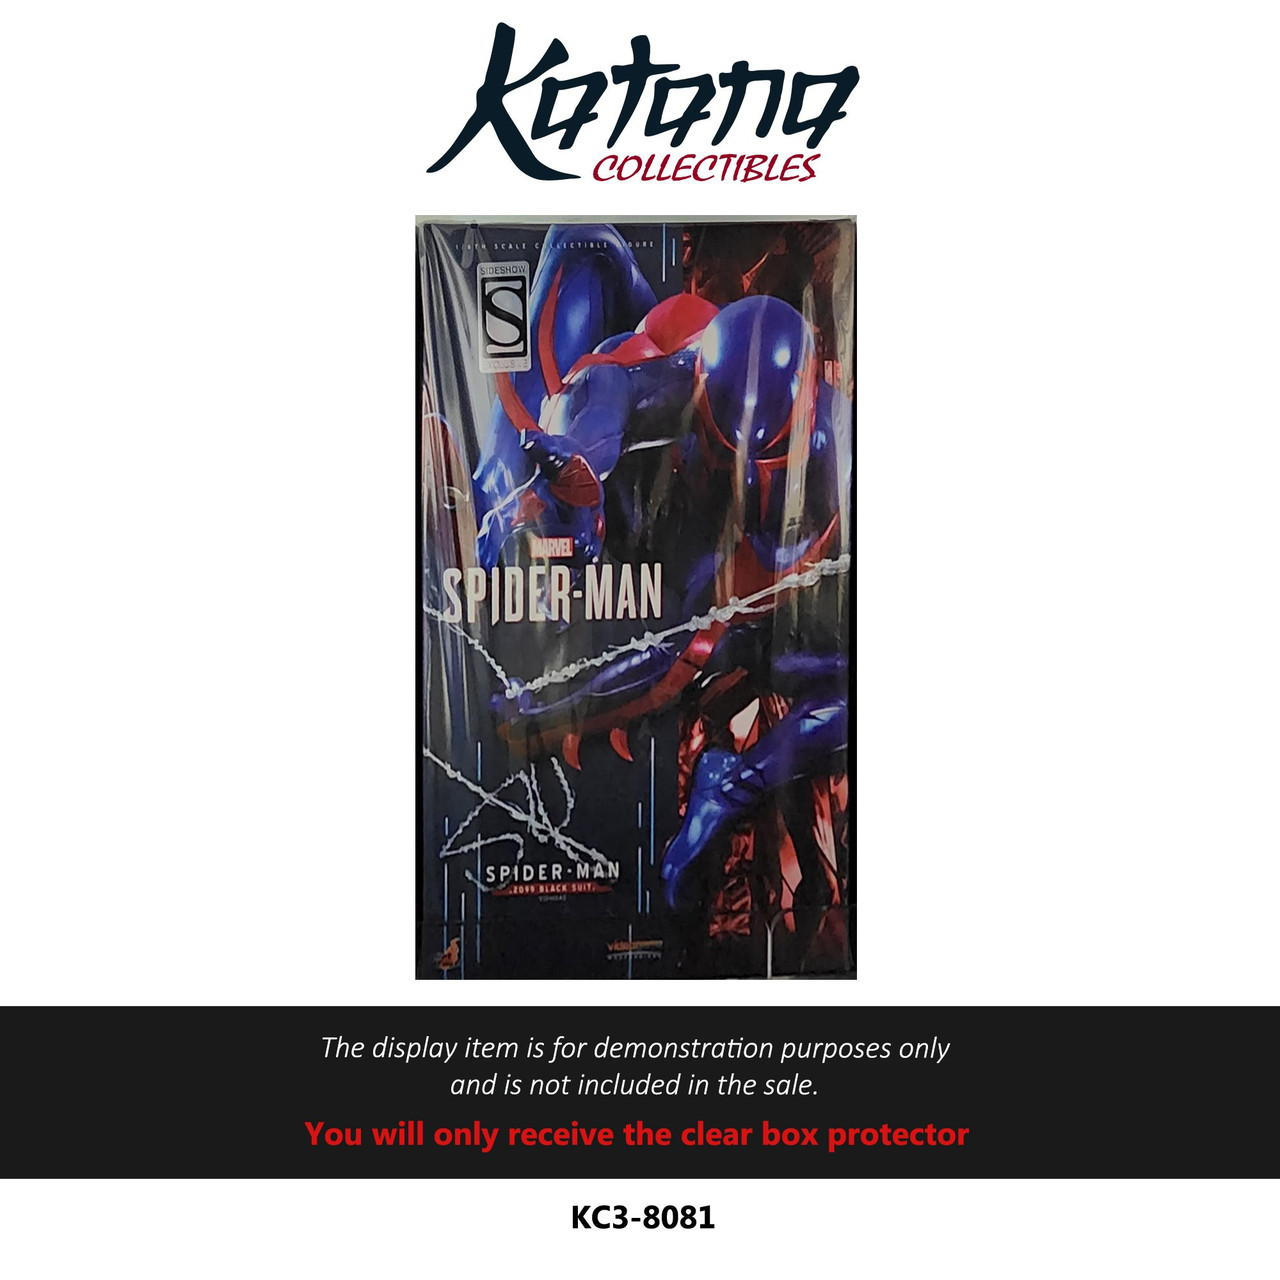 Katana Collectibles Protector For SPIDER-MAN (SPIDER-MAN 2099 BLACK SUIT)